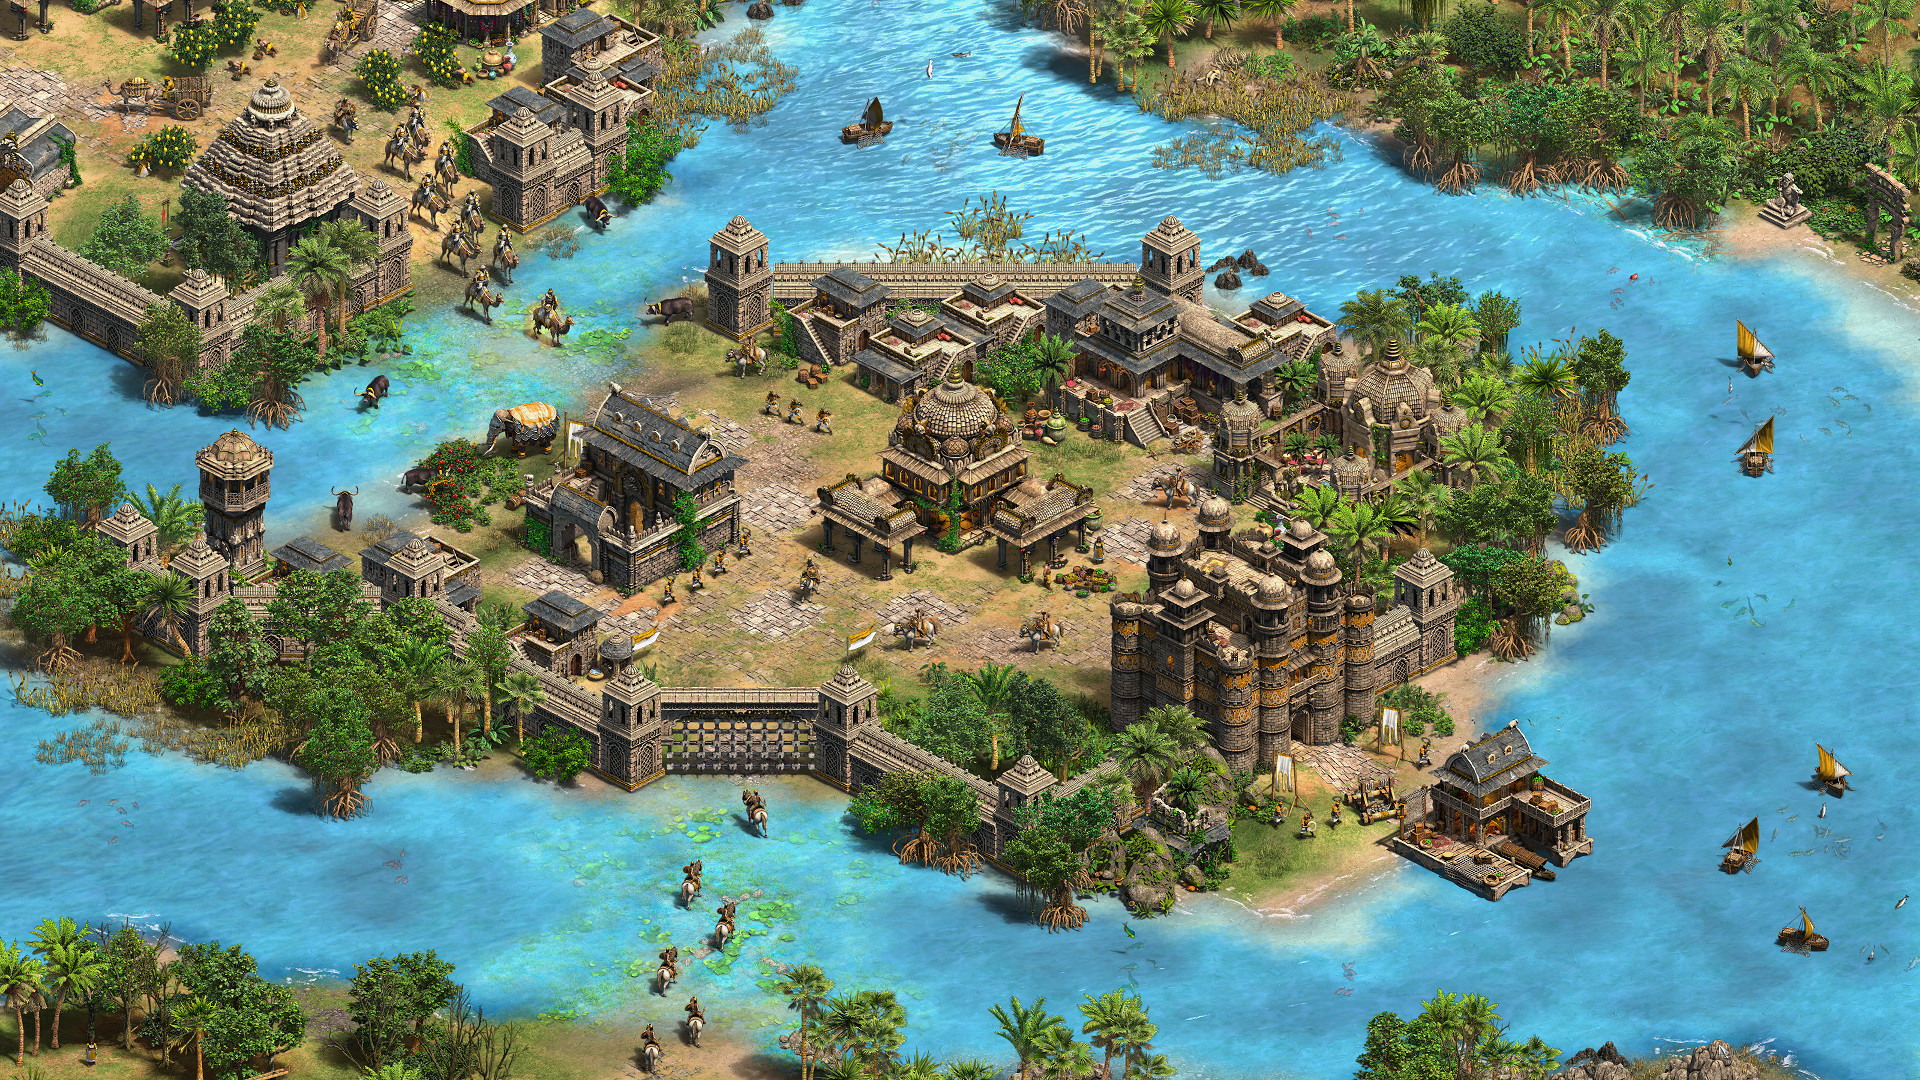 Age of Empires II: Definitive Edition - Dynasties of India - screenshot 2